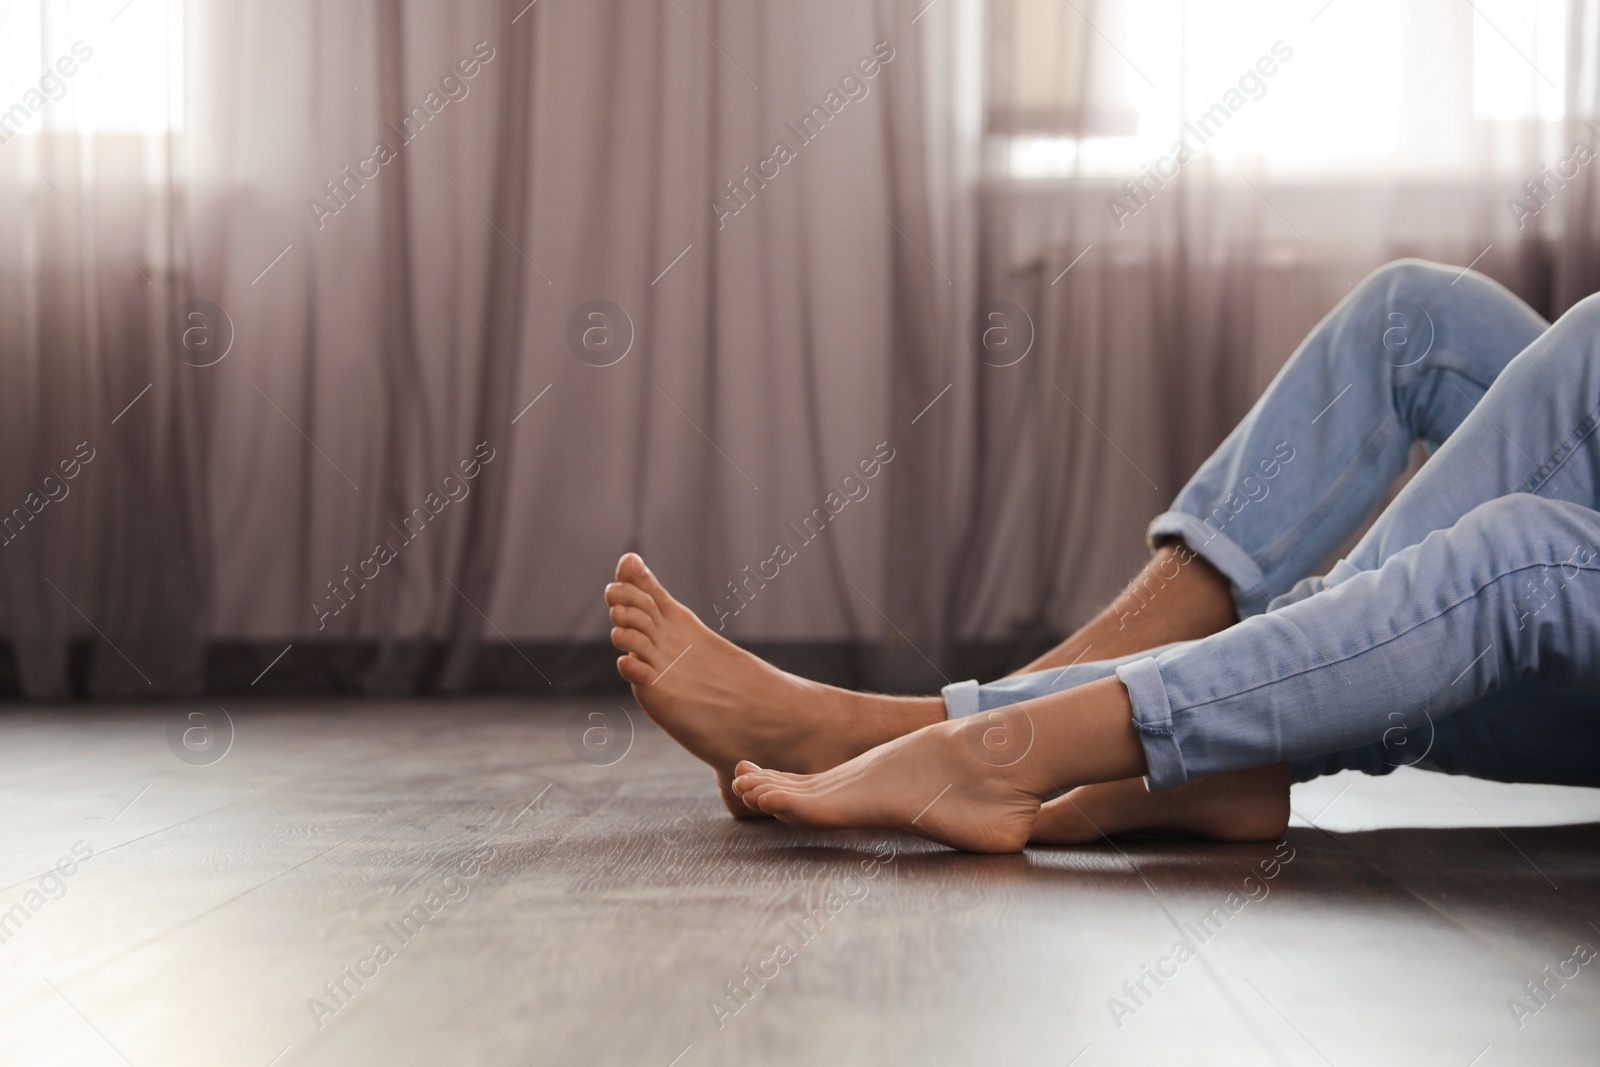 Photo of Barefoot couple sitting on warm floor at home, closeup view with space for text. Heating system